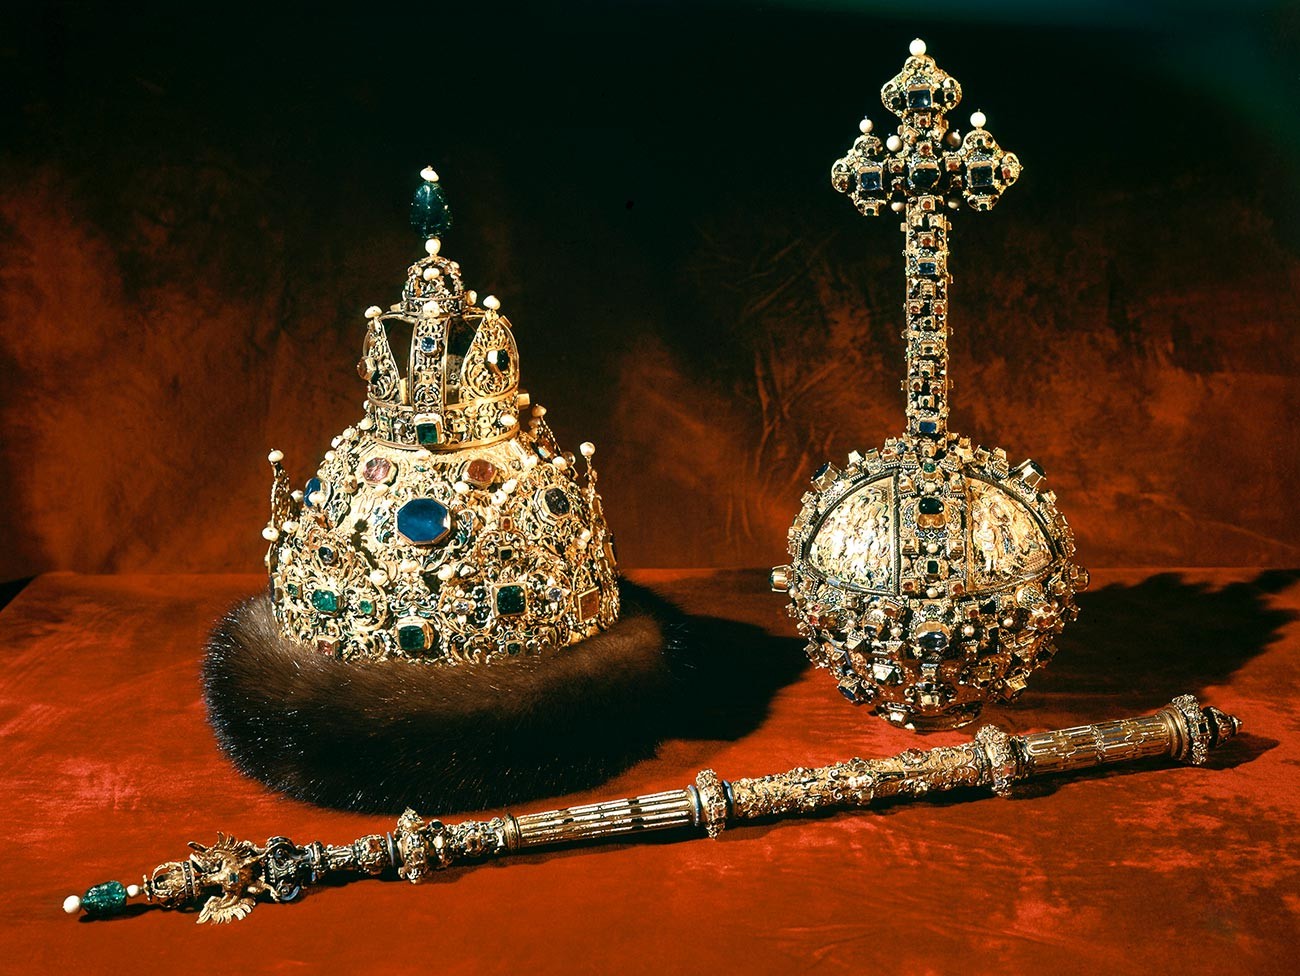 Russian tsarist regalia: the crown, the scepter and the orb